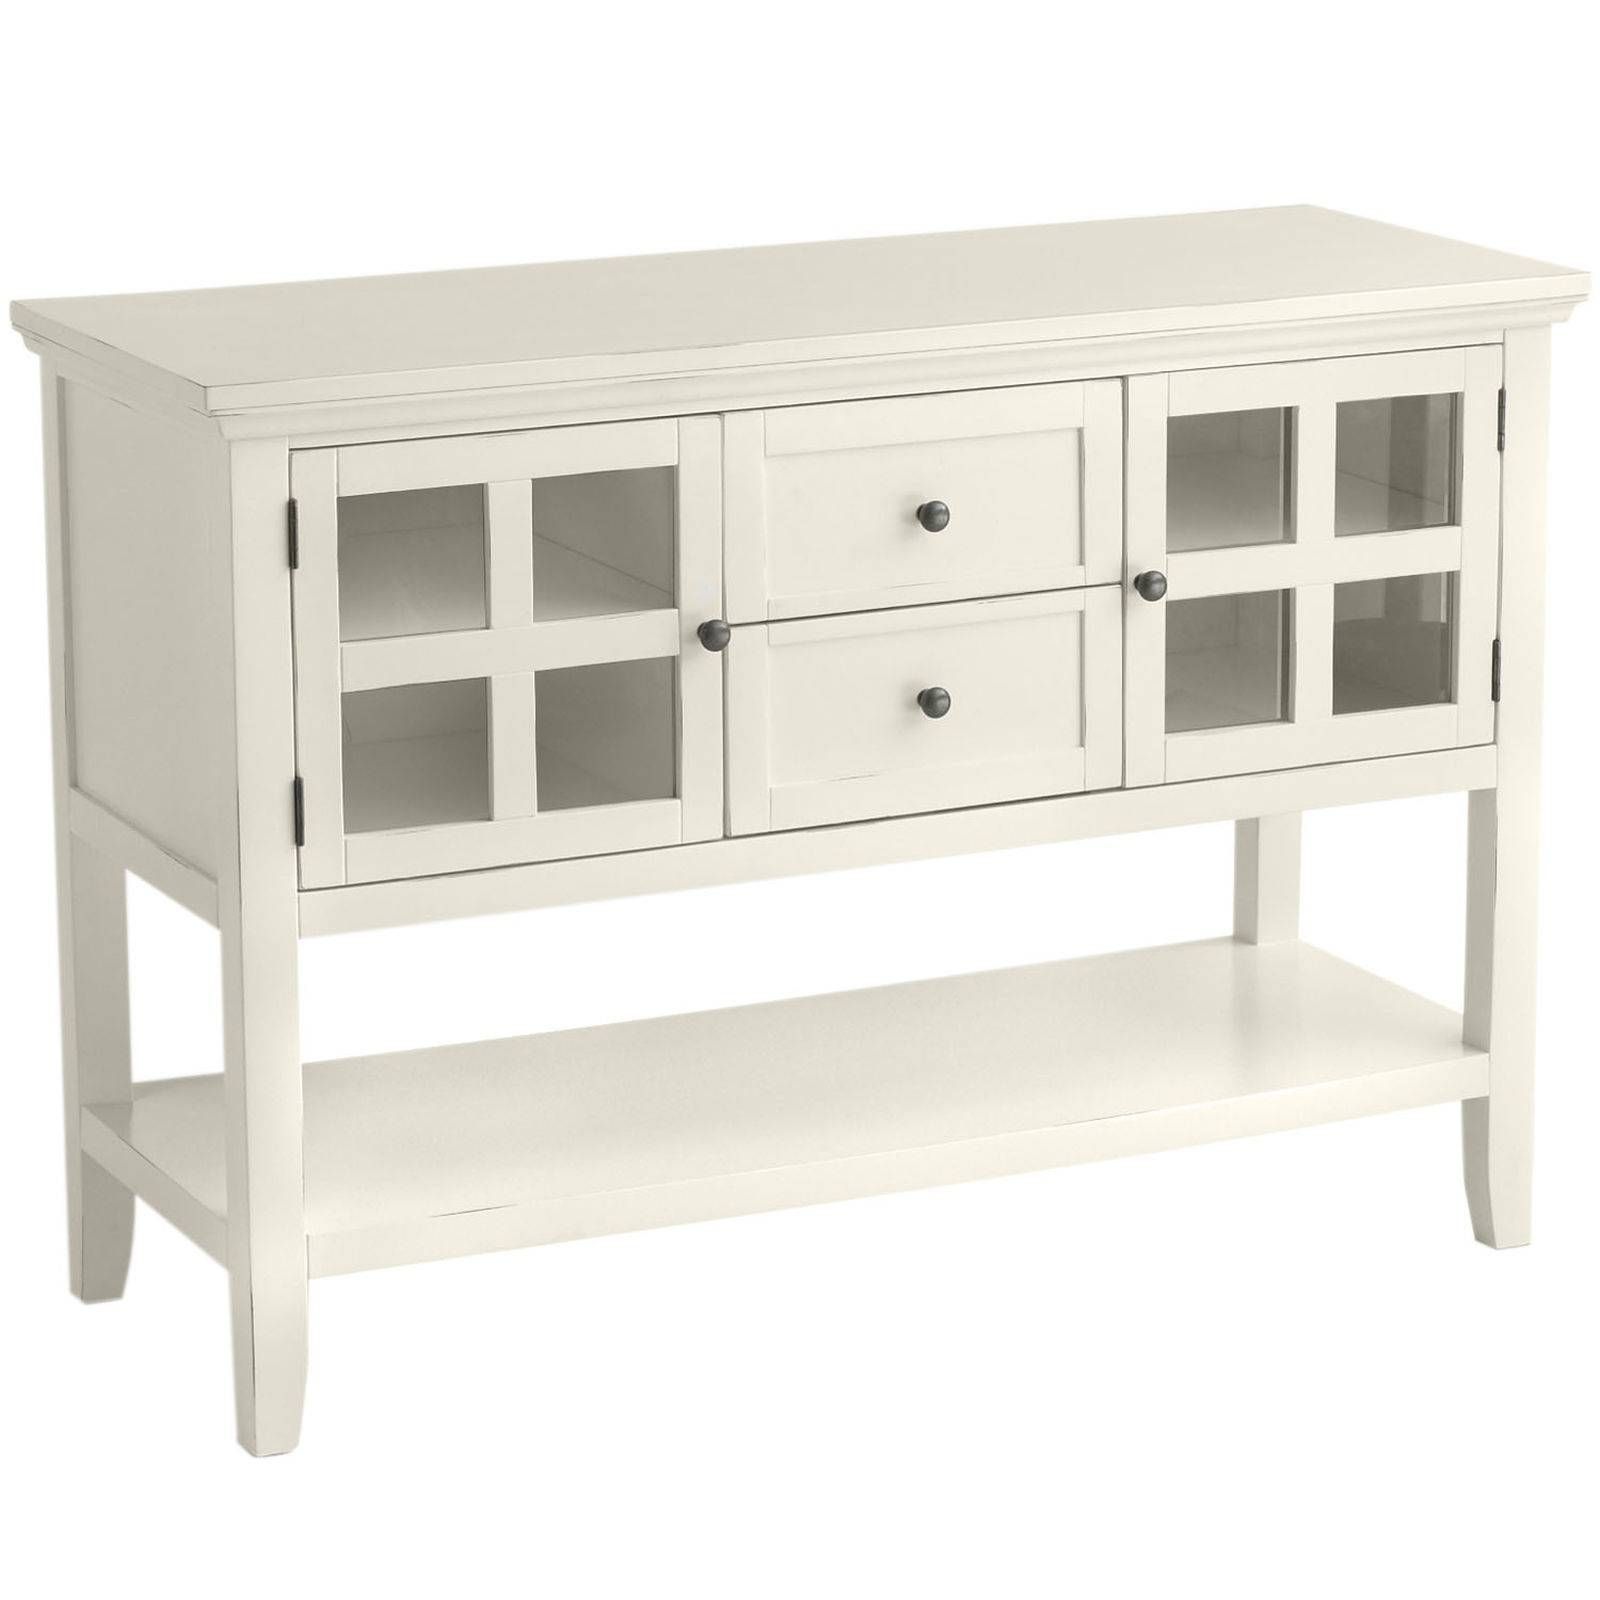 Sideboards: Glamorous White Sideboard Table Antique White With Small White Sideboards (View 8 of 30)